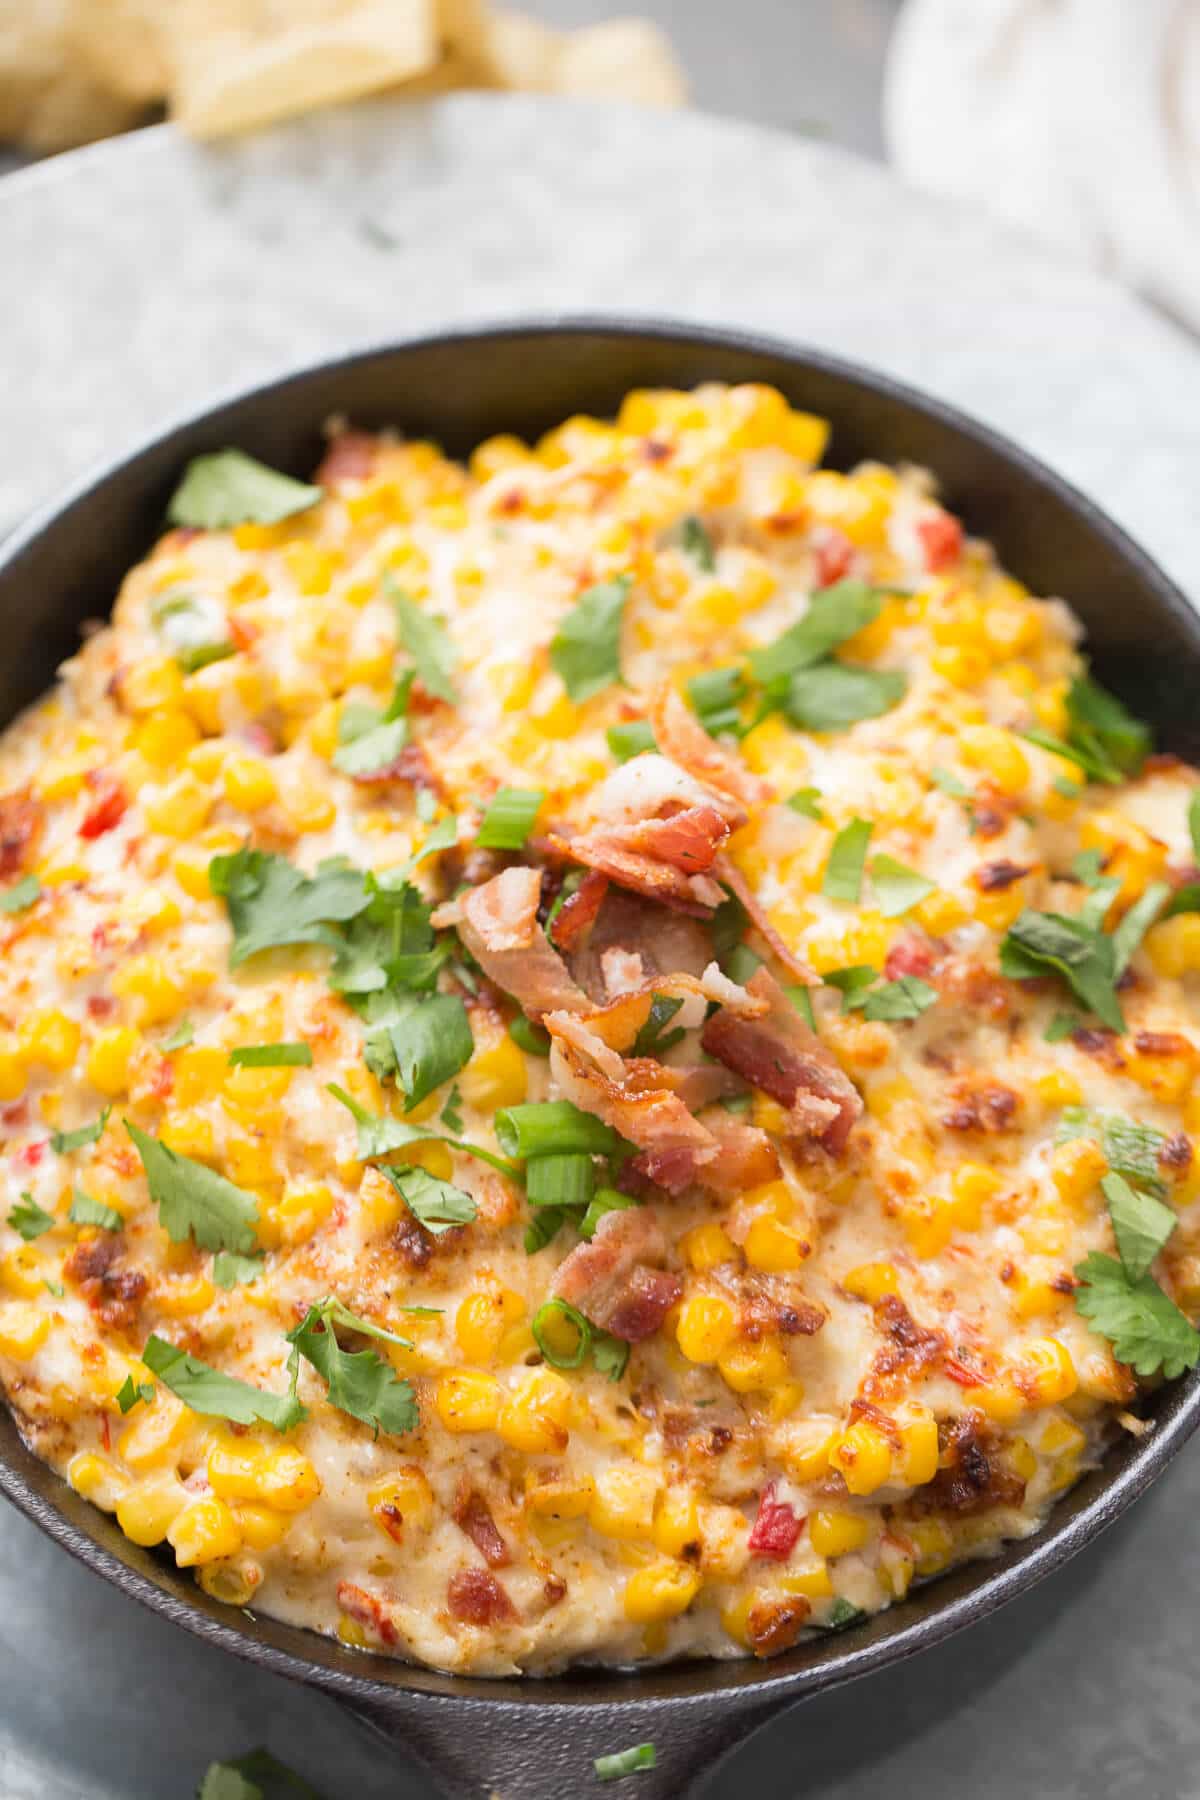 This hot corn dip recipe might be the best thing ever! You can't ever go wrong with hot melted cheese and bacon!